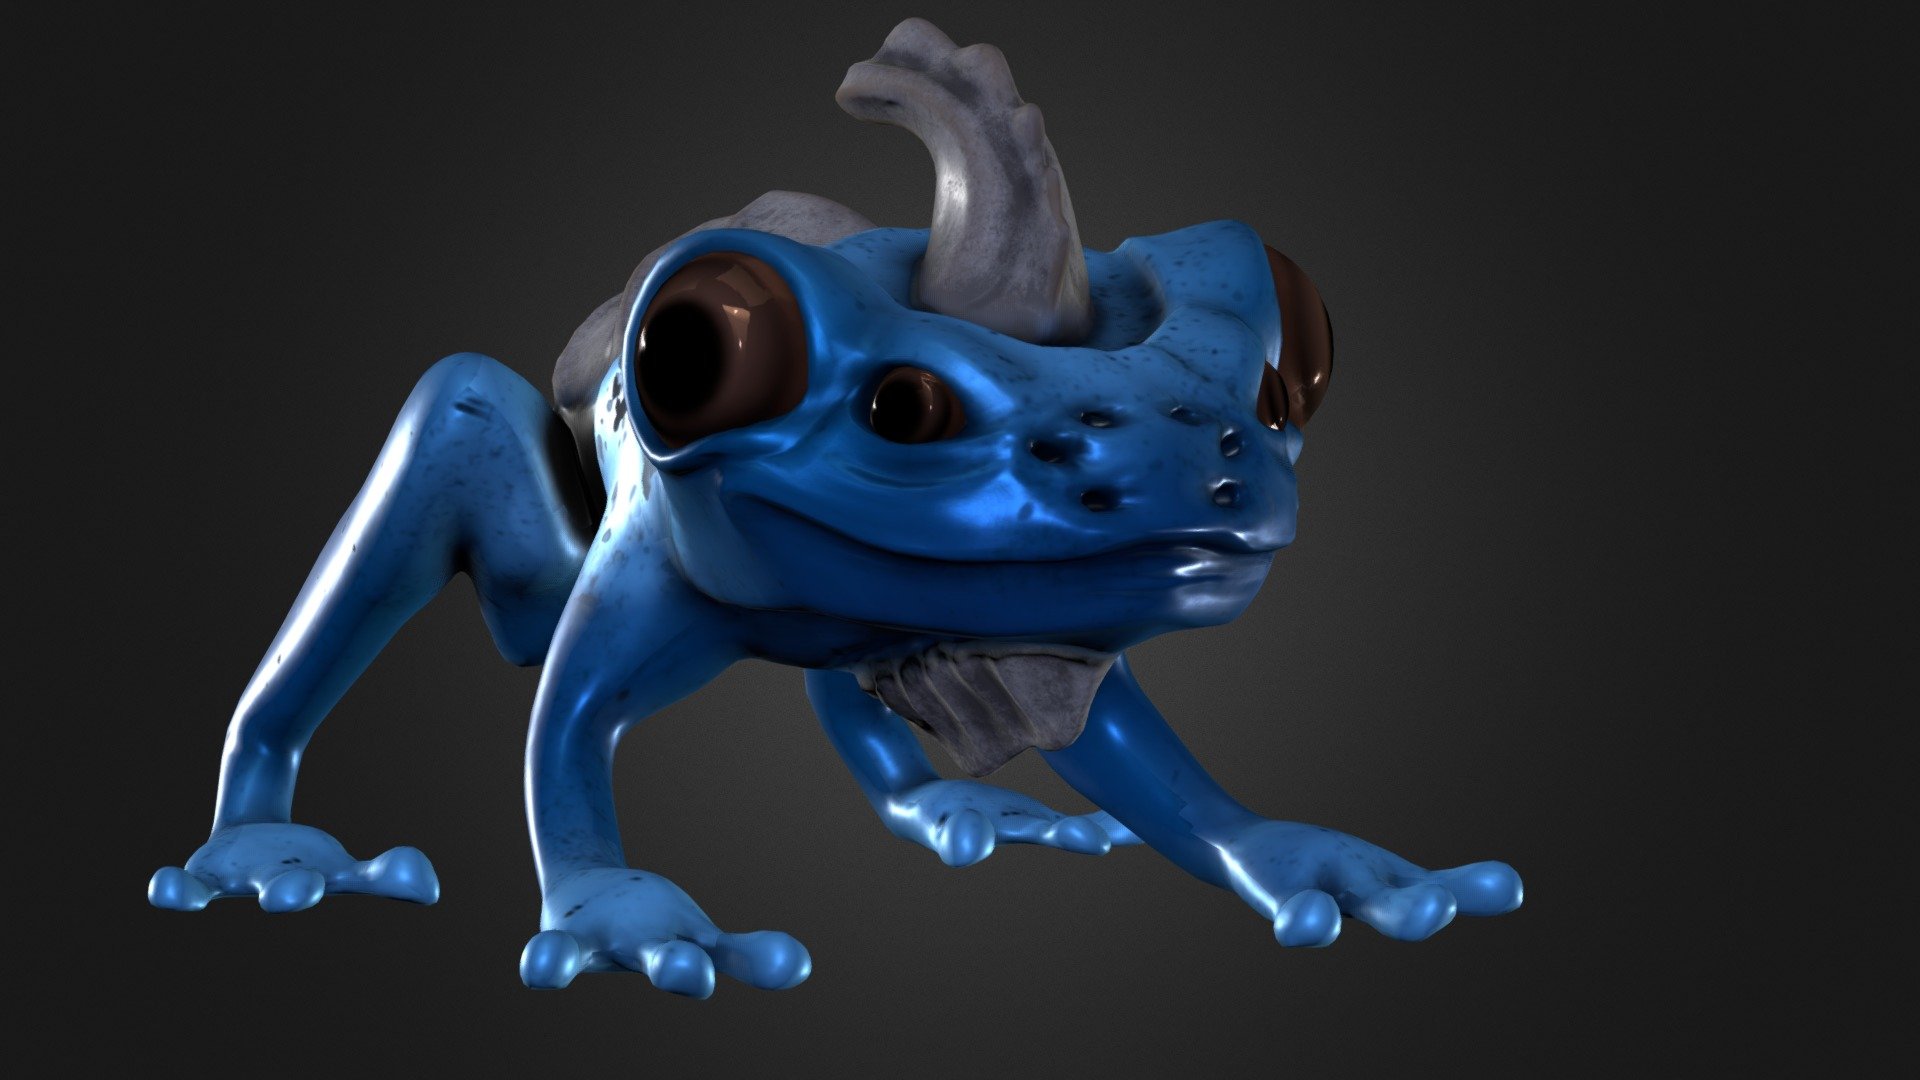 I was teaching some of my students sculpting in Sculptris and desided to quickly finish up the character with a quick rig, texture and animation!

https://www.artstation.com/artwork/RYYOor - Cute Alien Frog - 3D model by Qutiix (@joshiisshh) 3d model